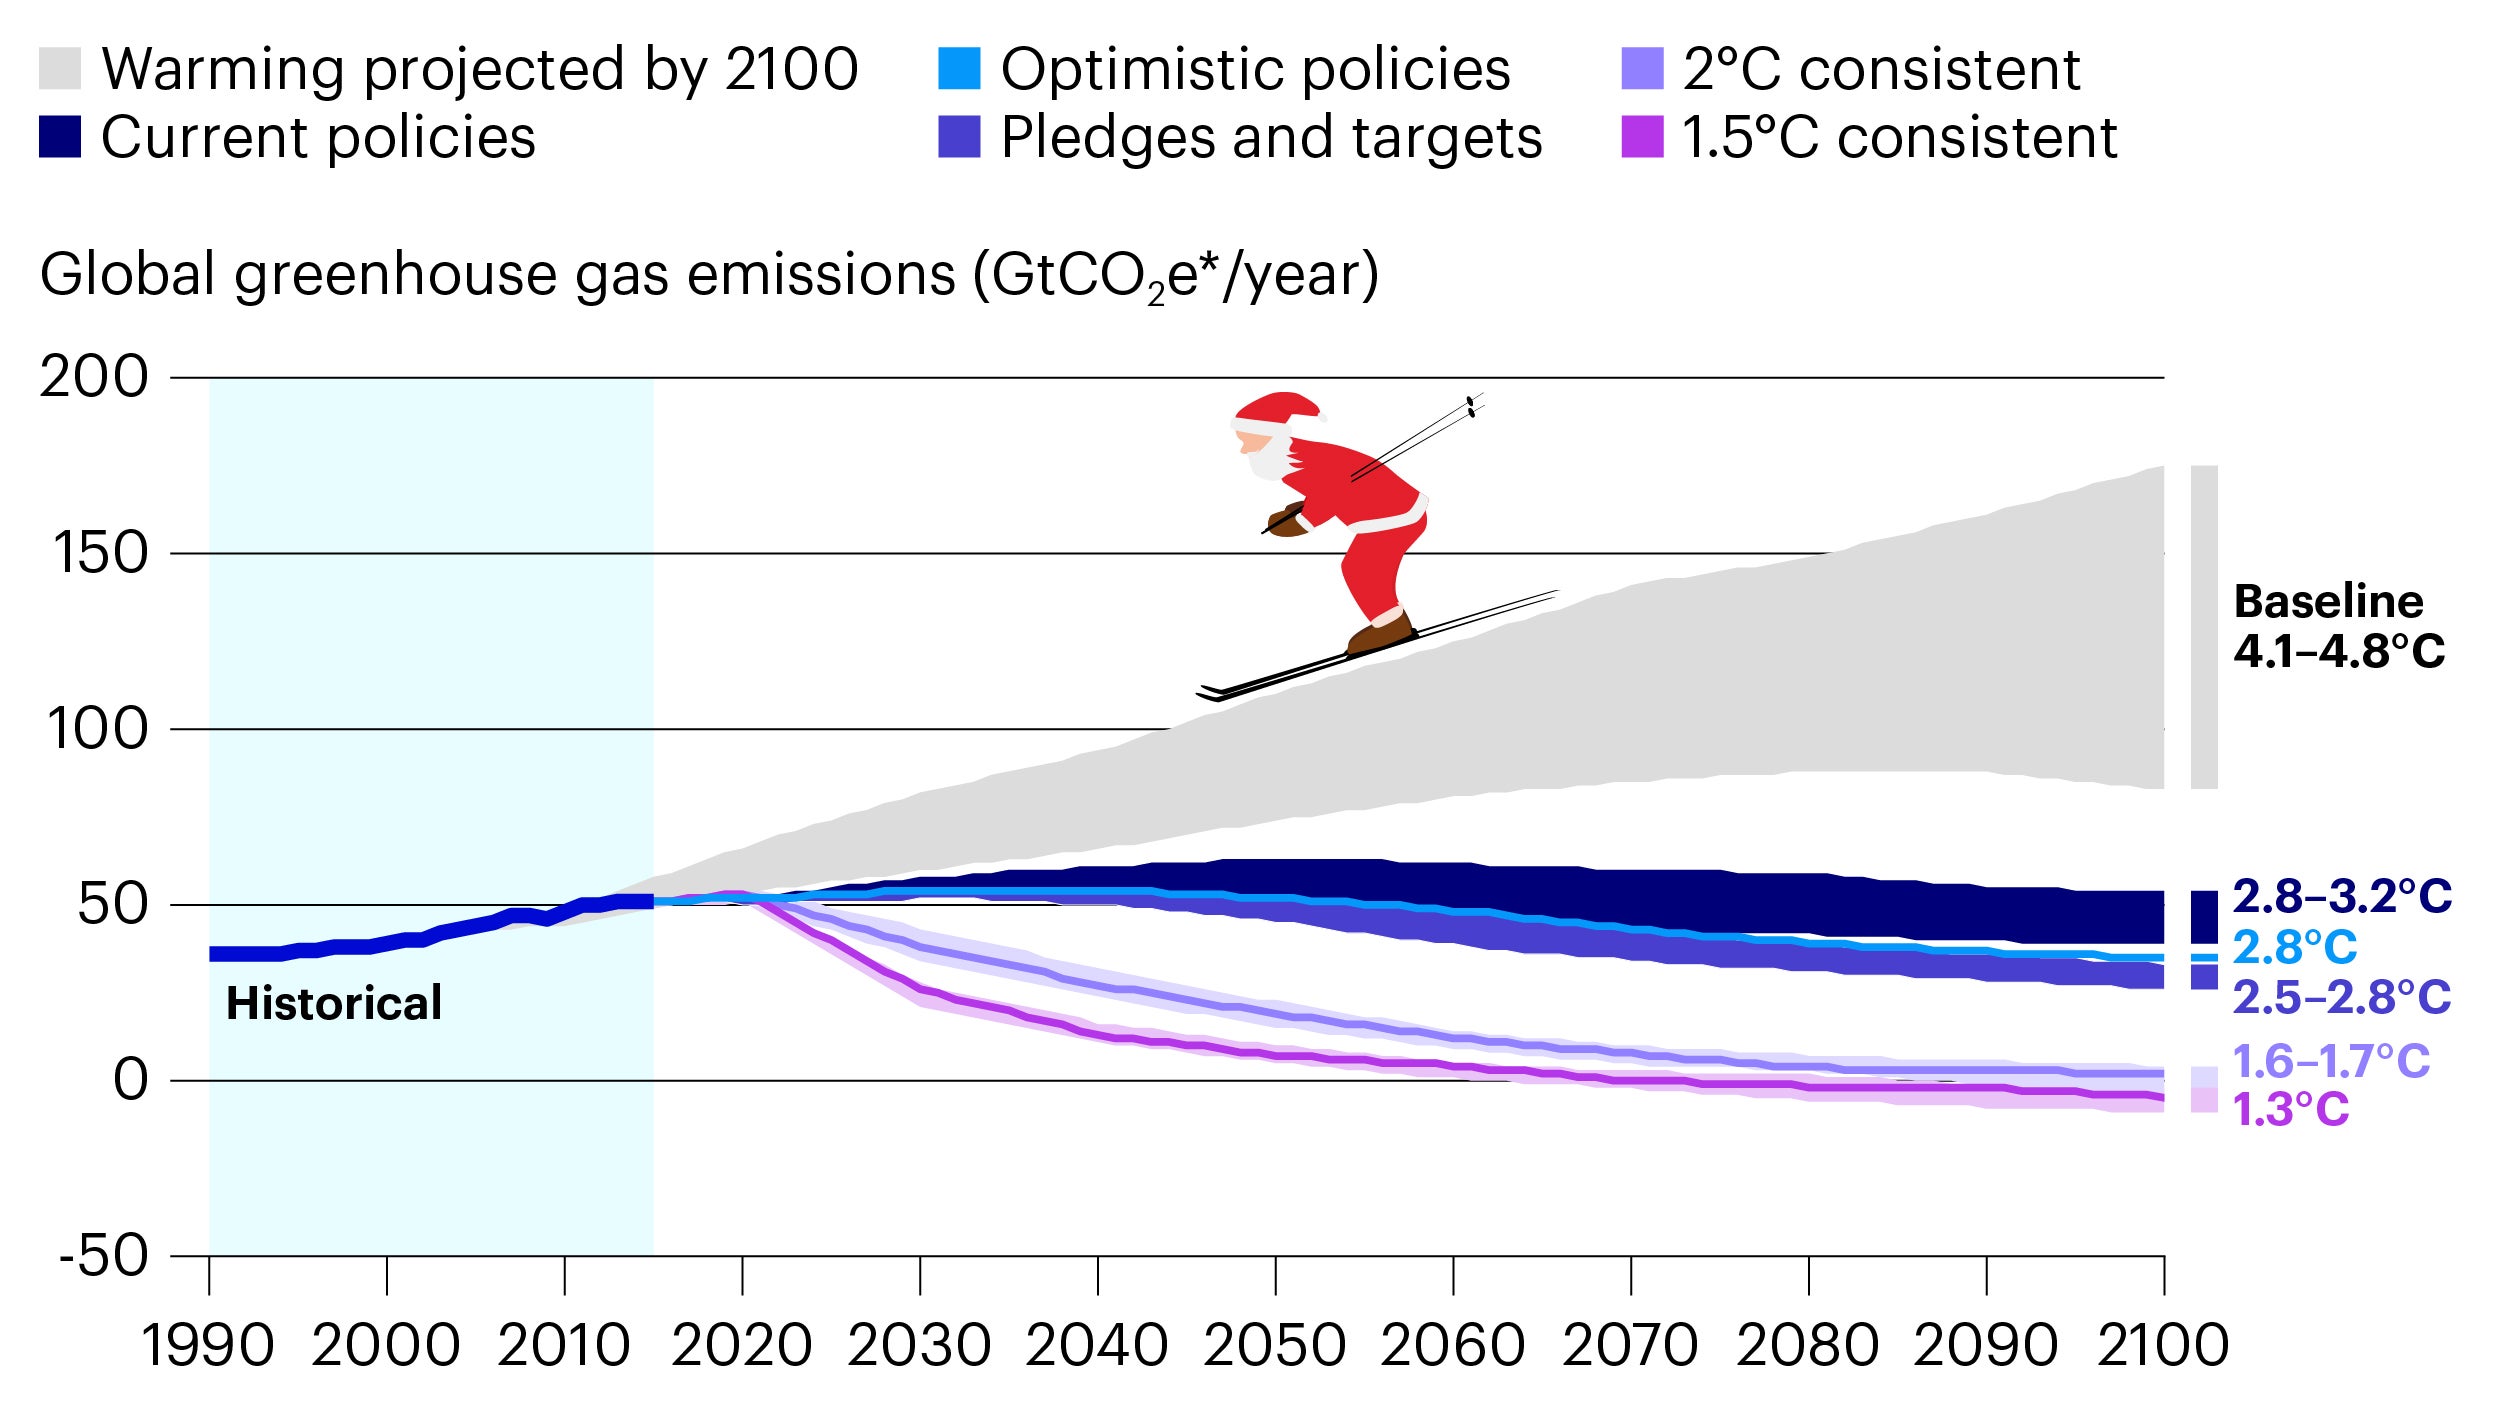  Figure 1. Emissions and expected warming based on pledges and current policies